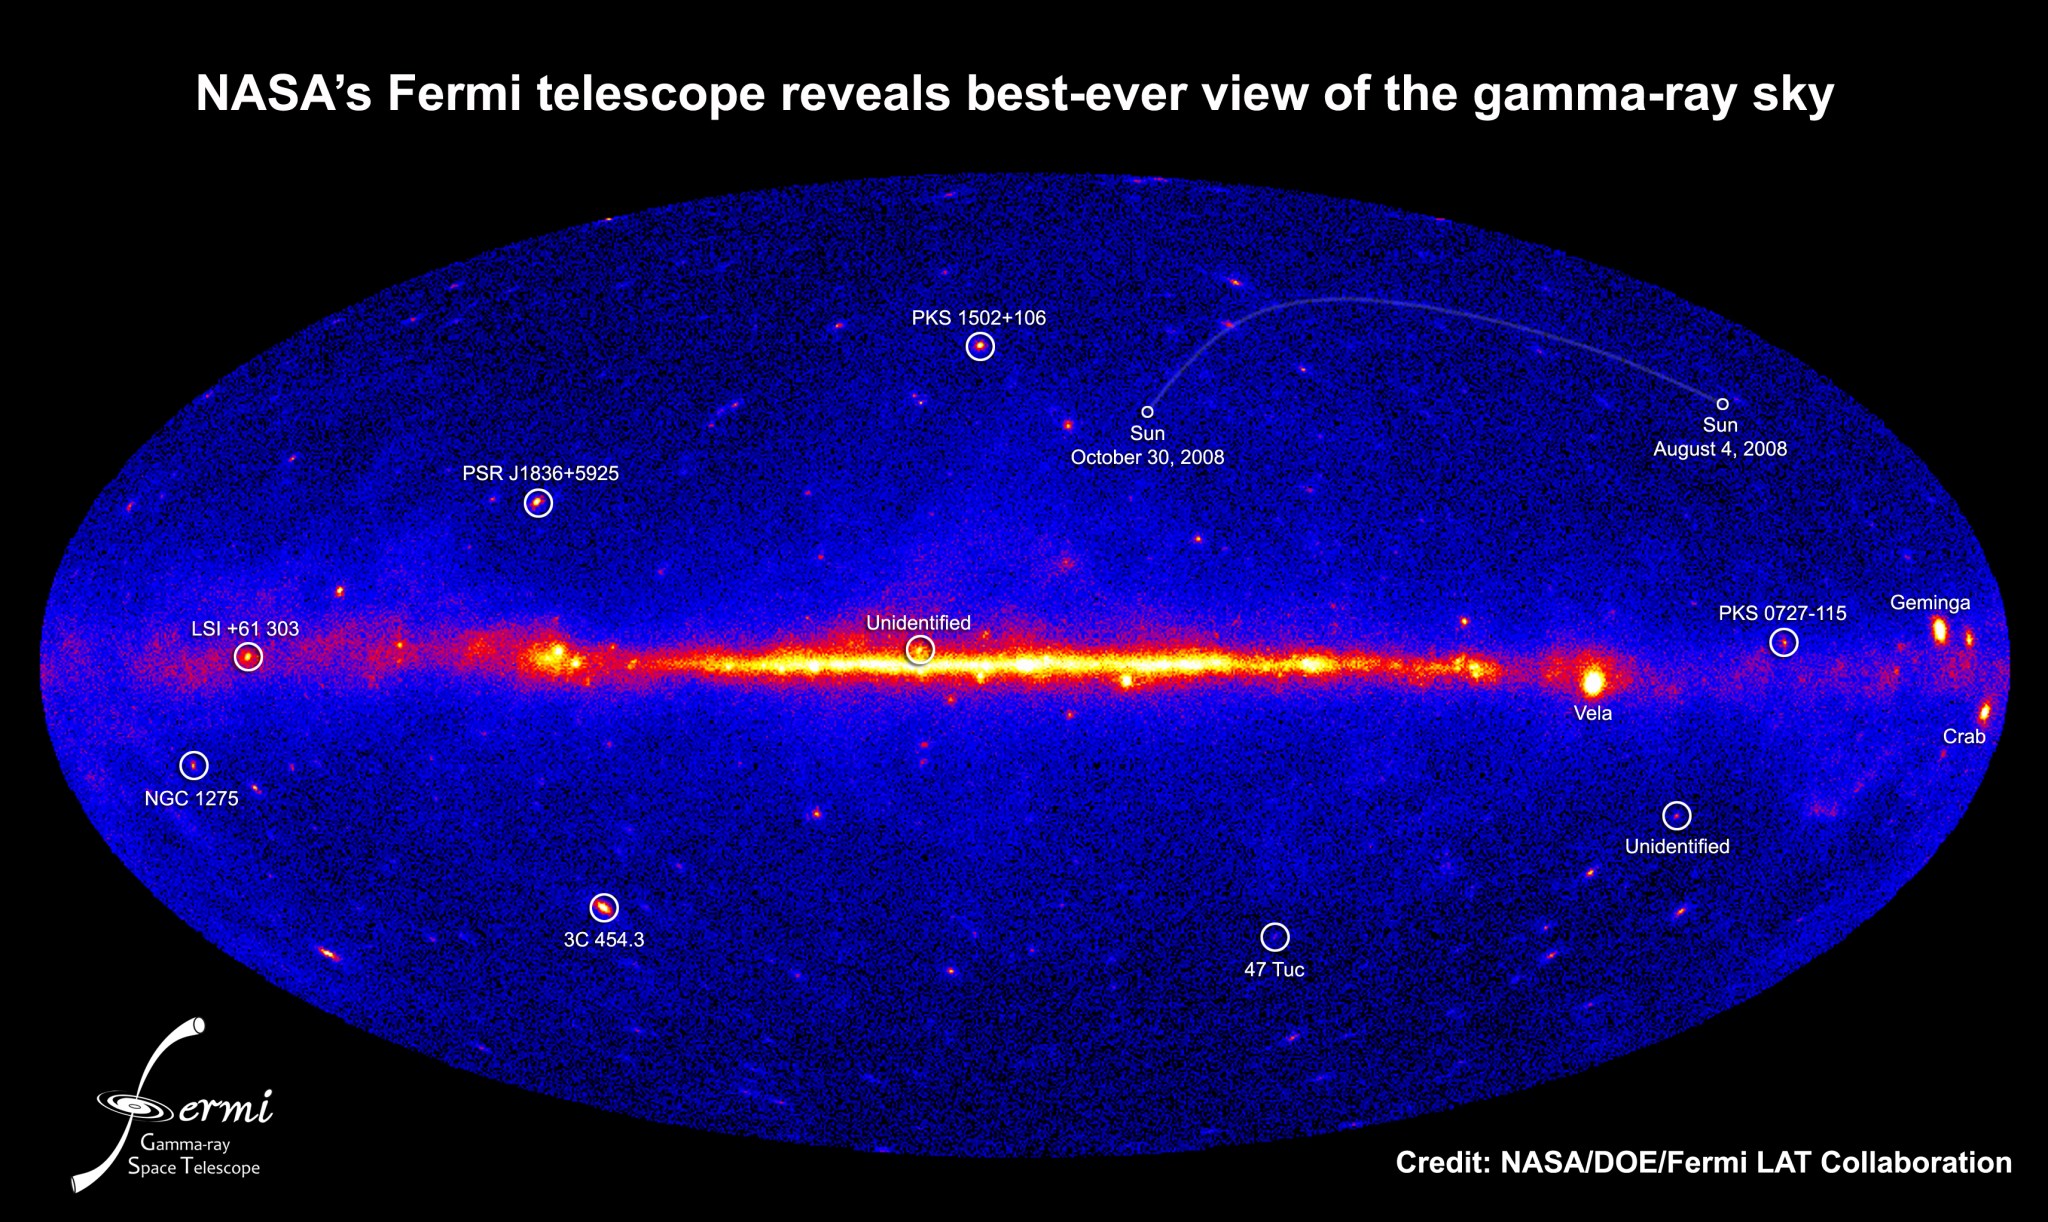 Fermi 3-month view of the gamma-ray sky